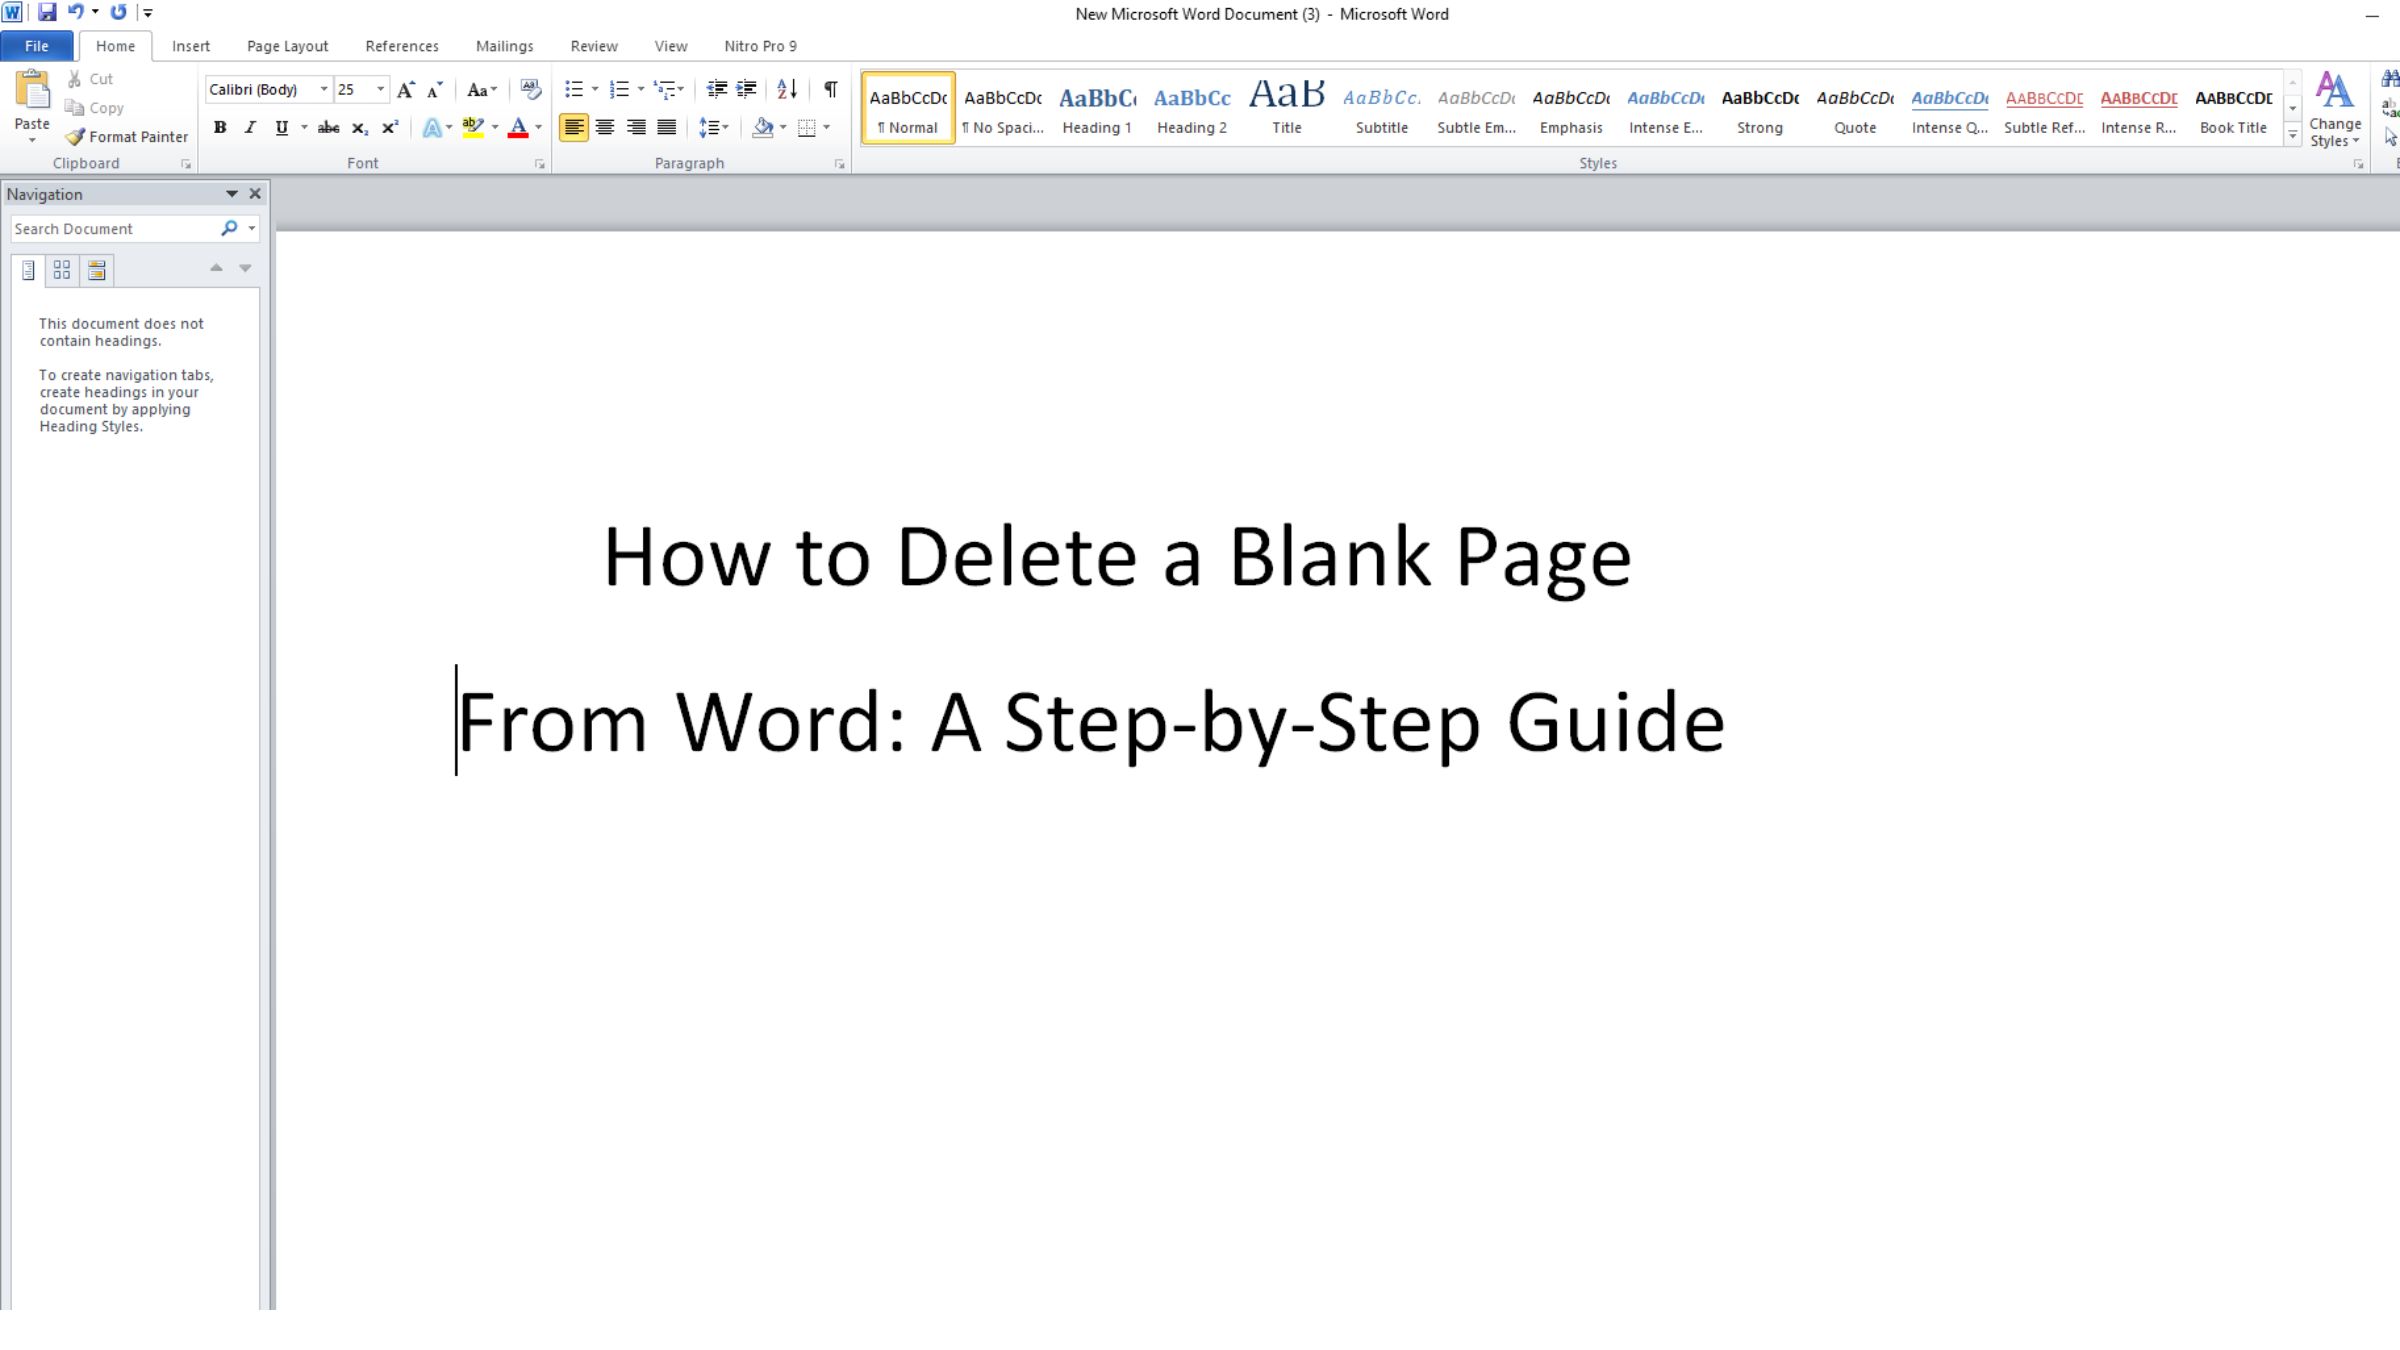 How to Delete a Blank Page from Word: A Step-by-Step Guide